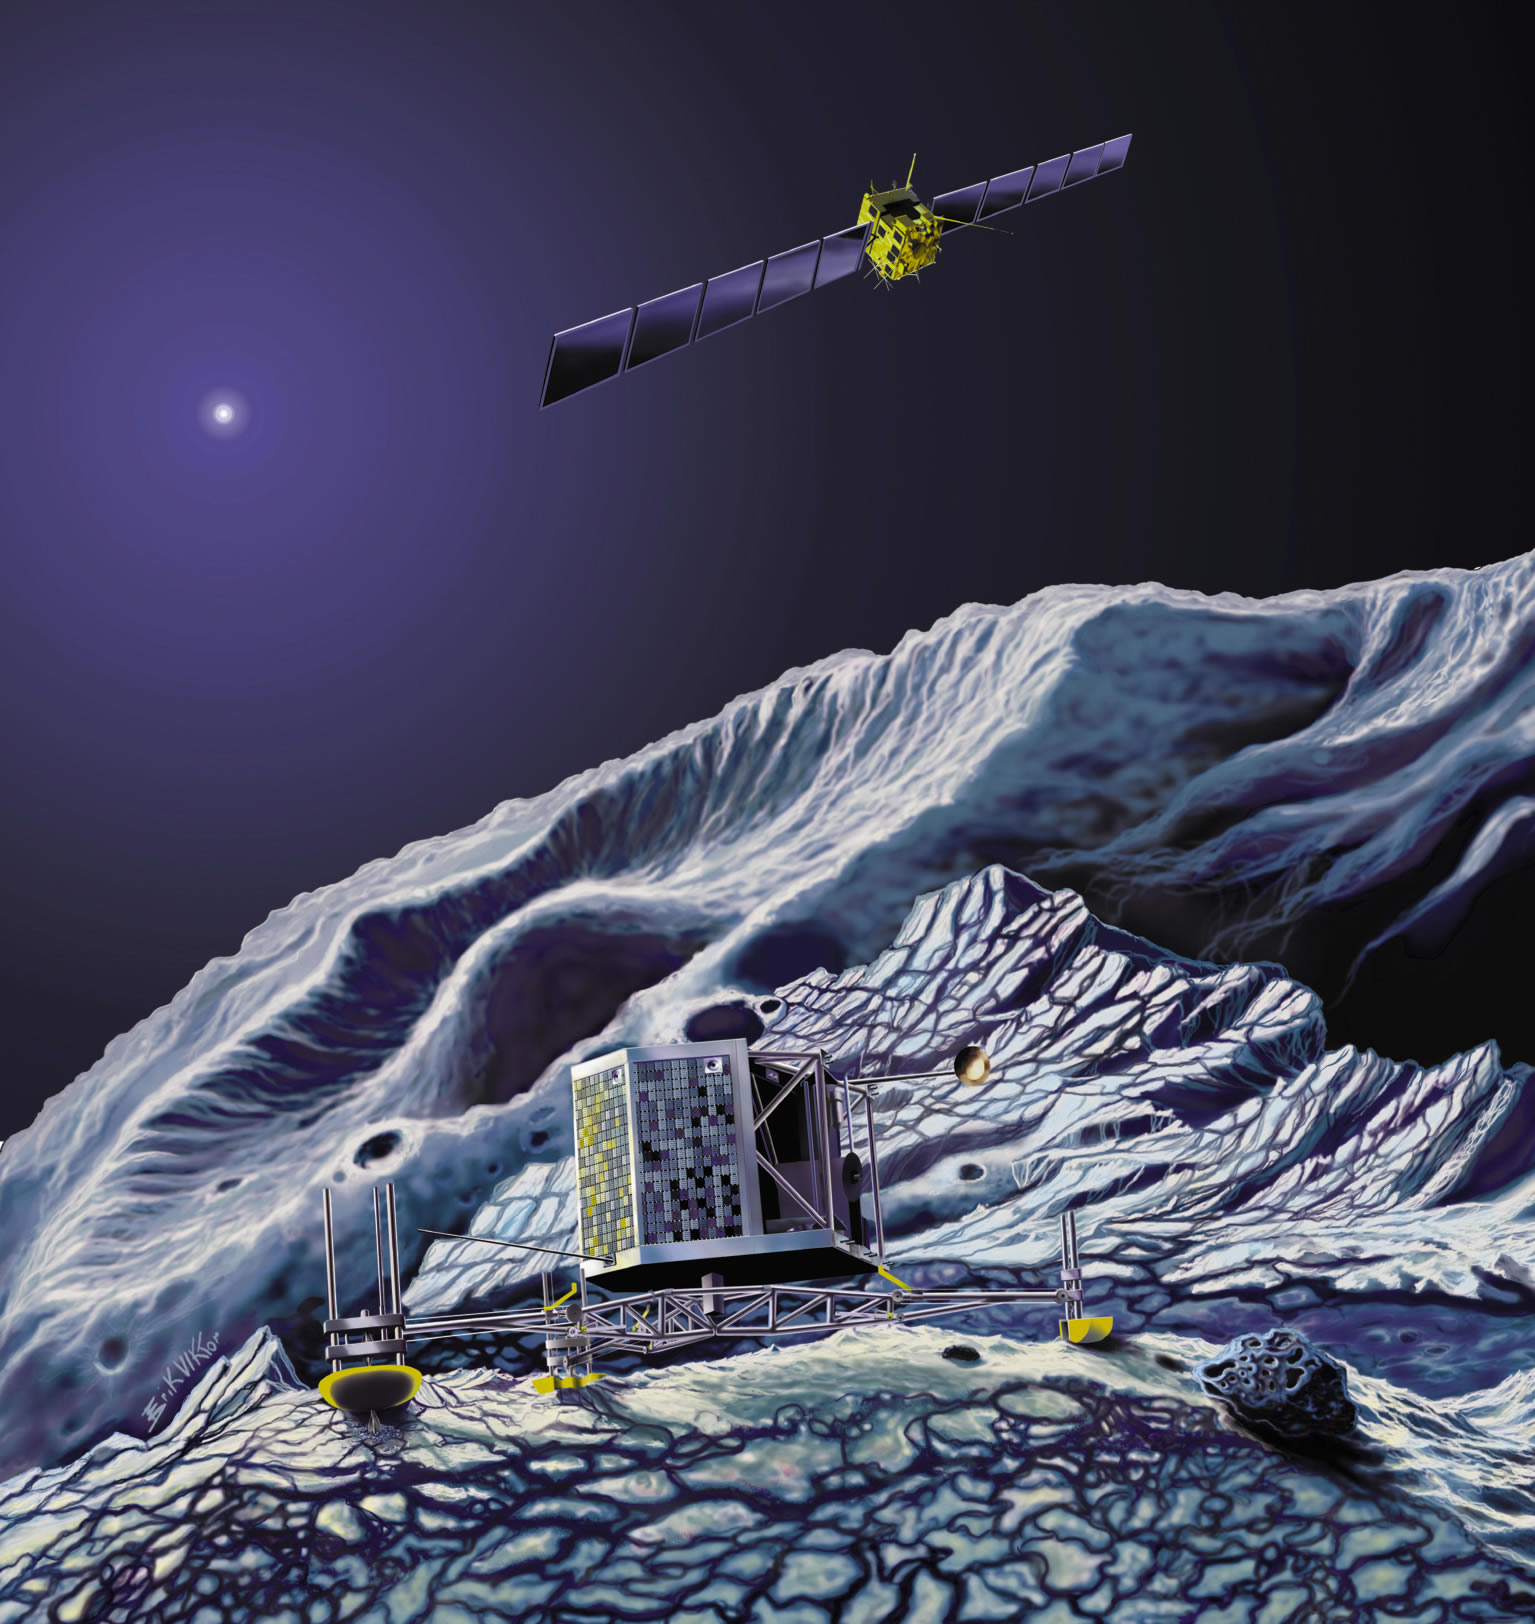 Rosetta will drop a lander on a comet's nucleus and observe how the comet changes as it approaches the Sun.